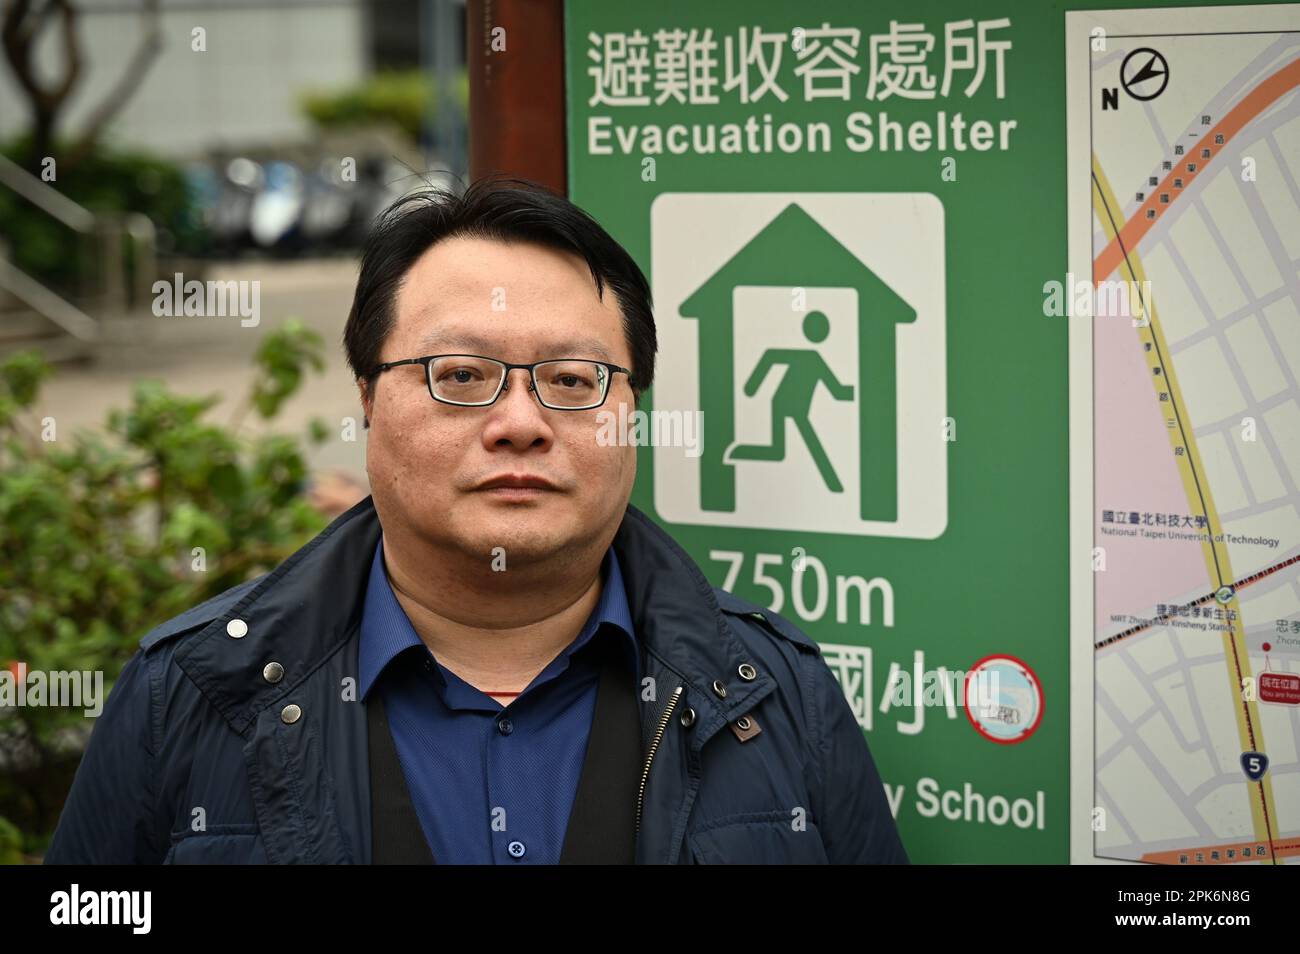 Taipei, Taiwan. 24th Mar, 2023. Kuma Academy co-founder Ho Cheng-hui stands near an evacuation shelter sign in Taipei, Taiwan on March 24, 2023. Interest in training has grown in civil defense training over the last year in the wake of ongoing threats from China and Russia's invasion of Ukraine. Photo by Thomas Maresca/UPI Credit: UPI/Alamy Live News Stock Photo